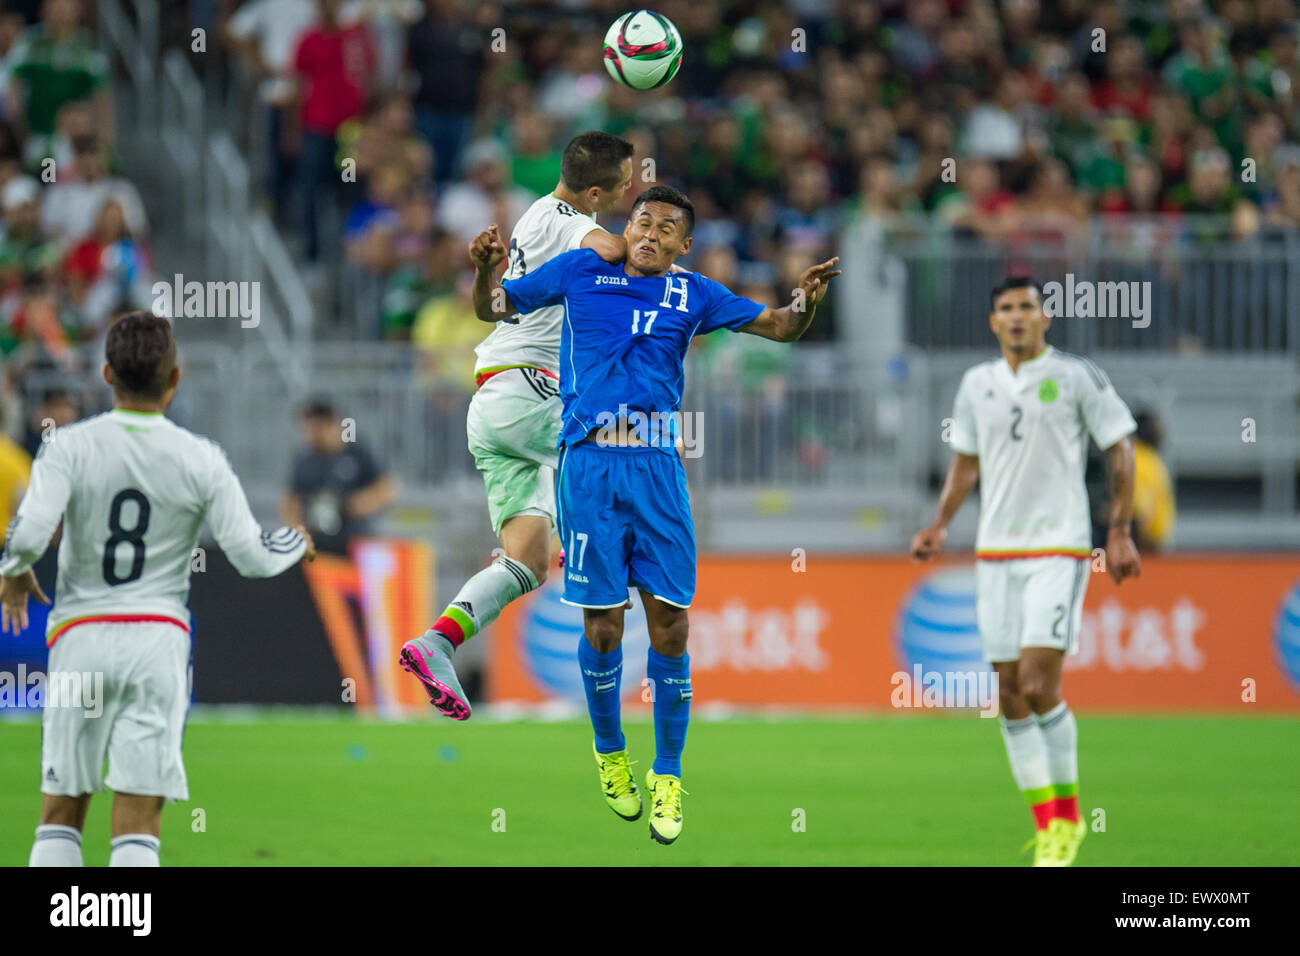 July 1, 2015: Mexico defender Paul Aguilar (22) and Honduras midfielder Andy Najar (17) battle for a header during the 2nd half of an international soccer match between Honduras and Mexico at NRG Stadium in Houston, TX. The game ended in a 0-0 draw.Trask Smith/CSM Stock Photo